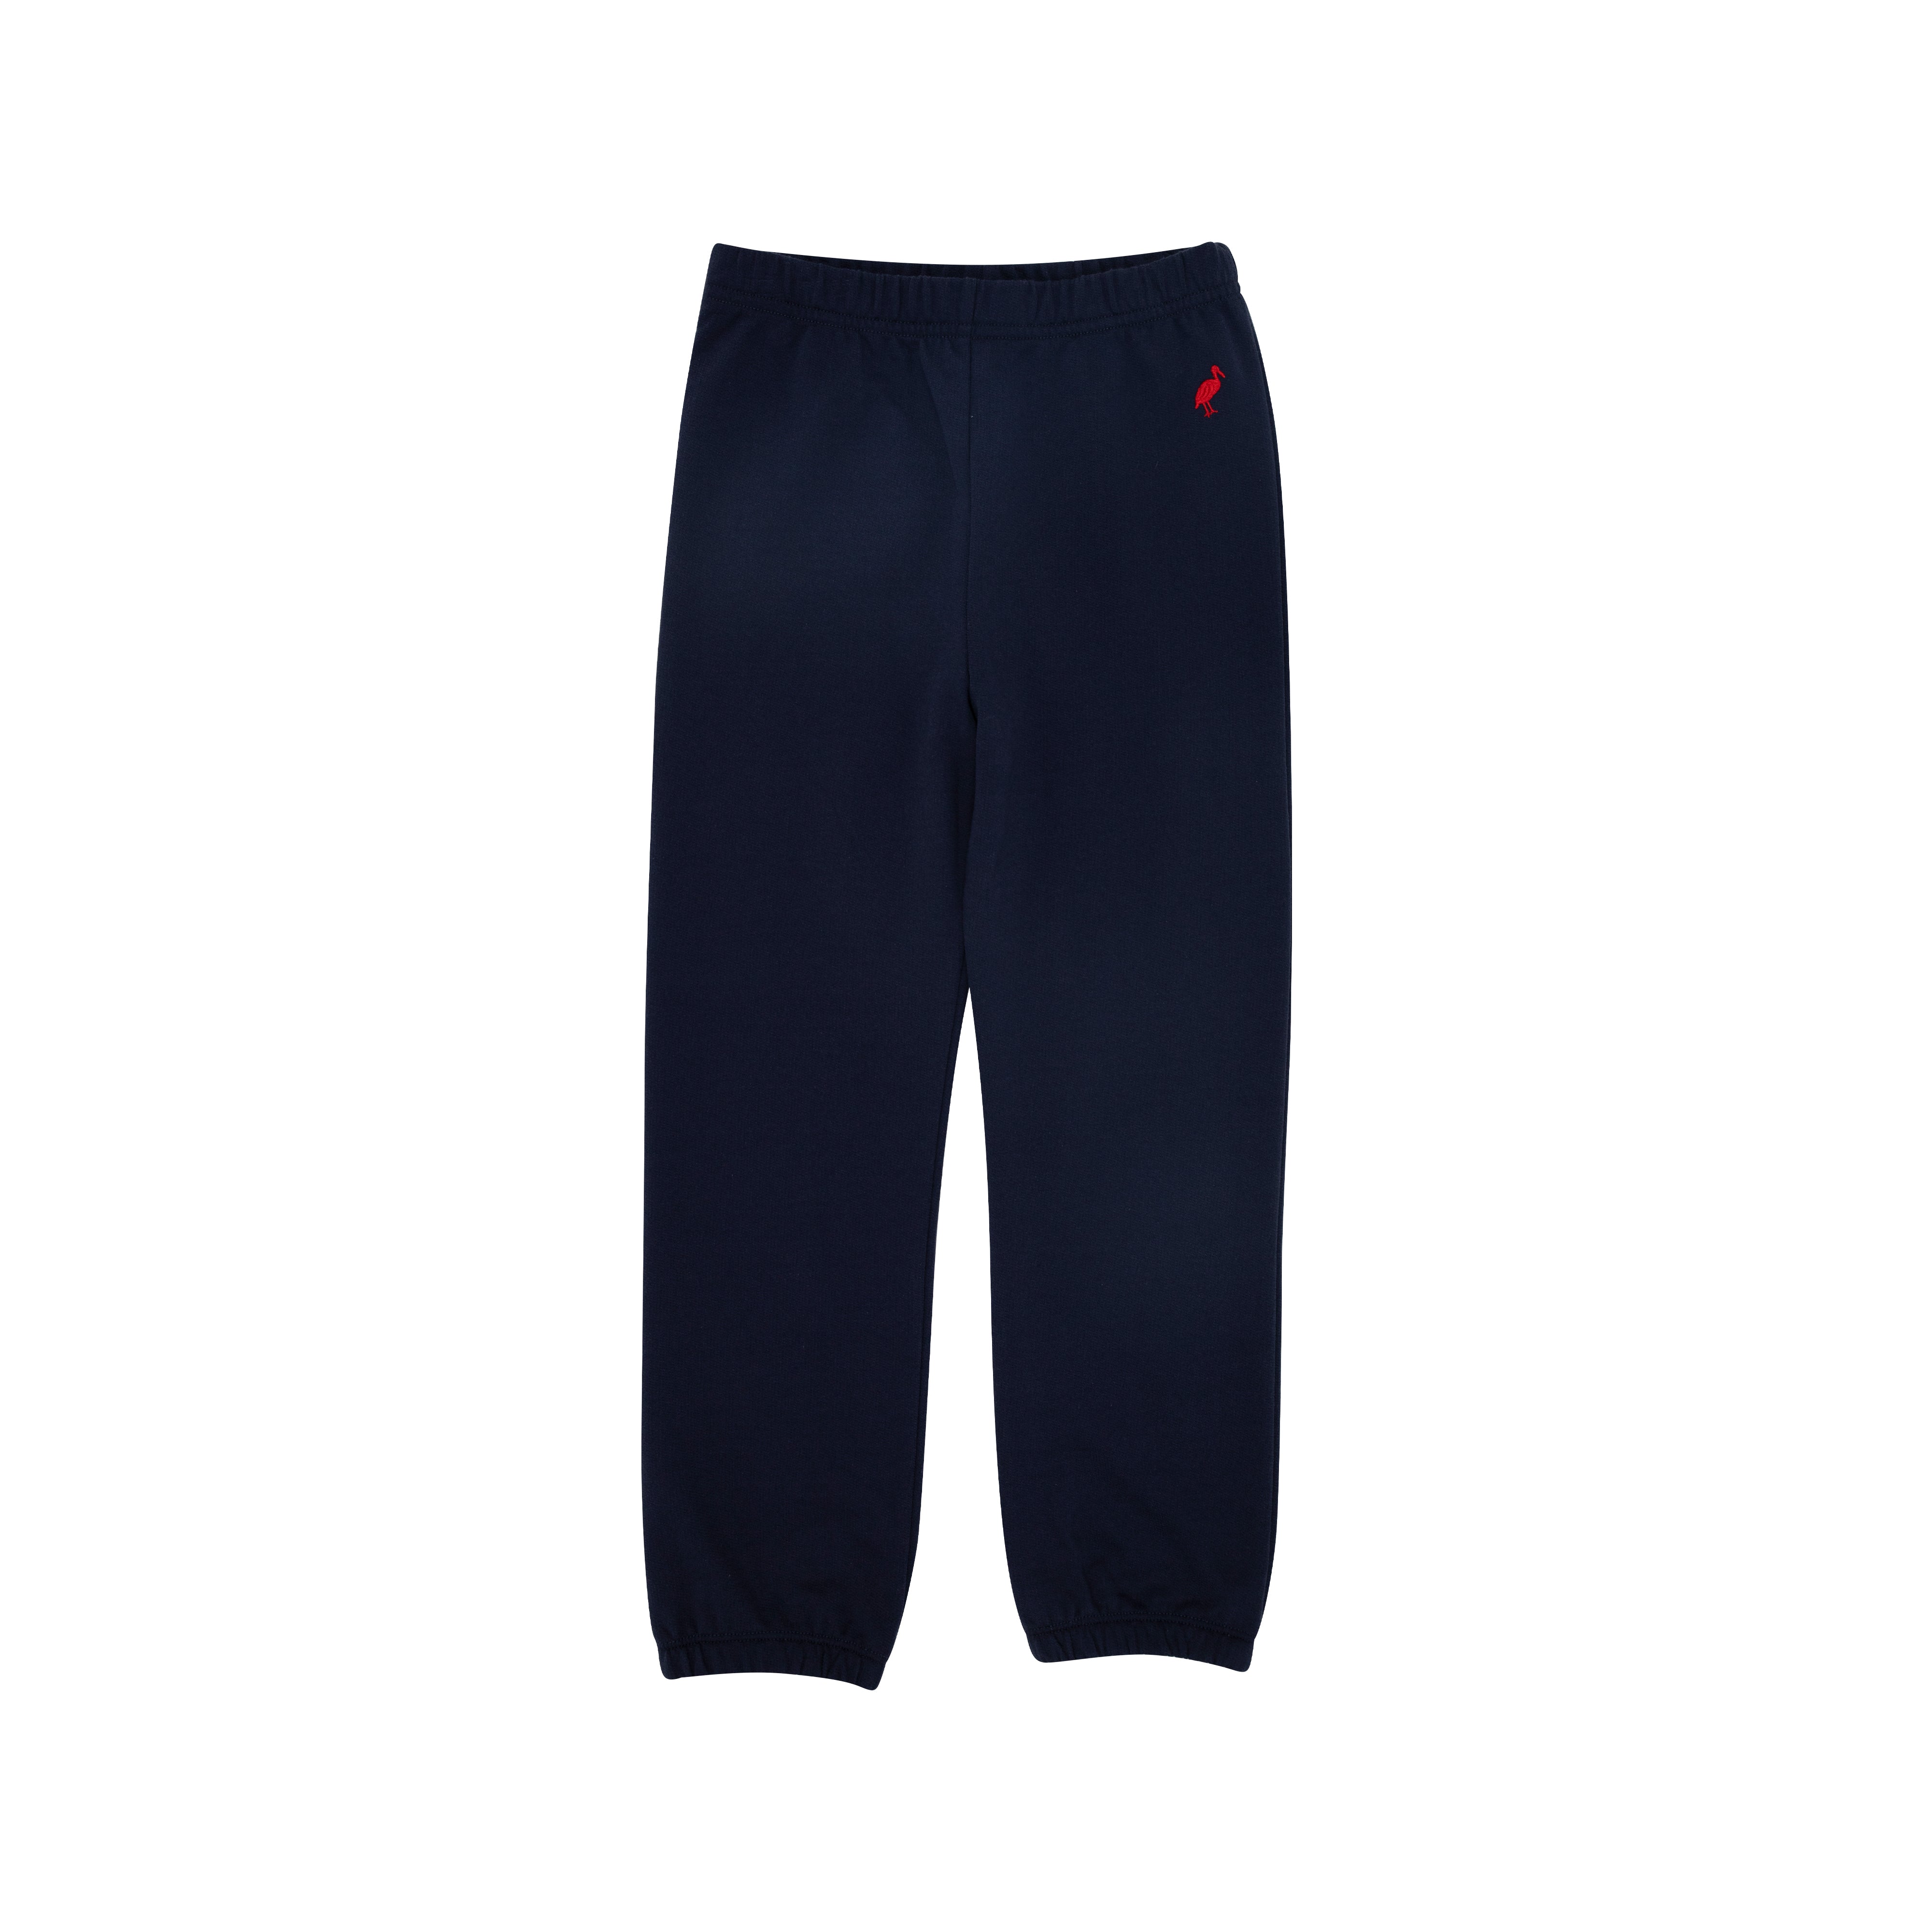 Gates Sweeney Sweatpants - Nantucket Navy with Richmond Red Stork – The ...